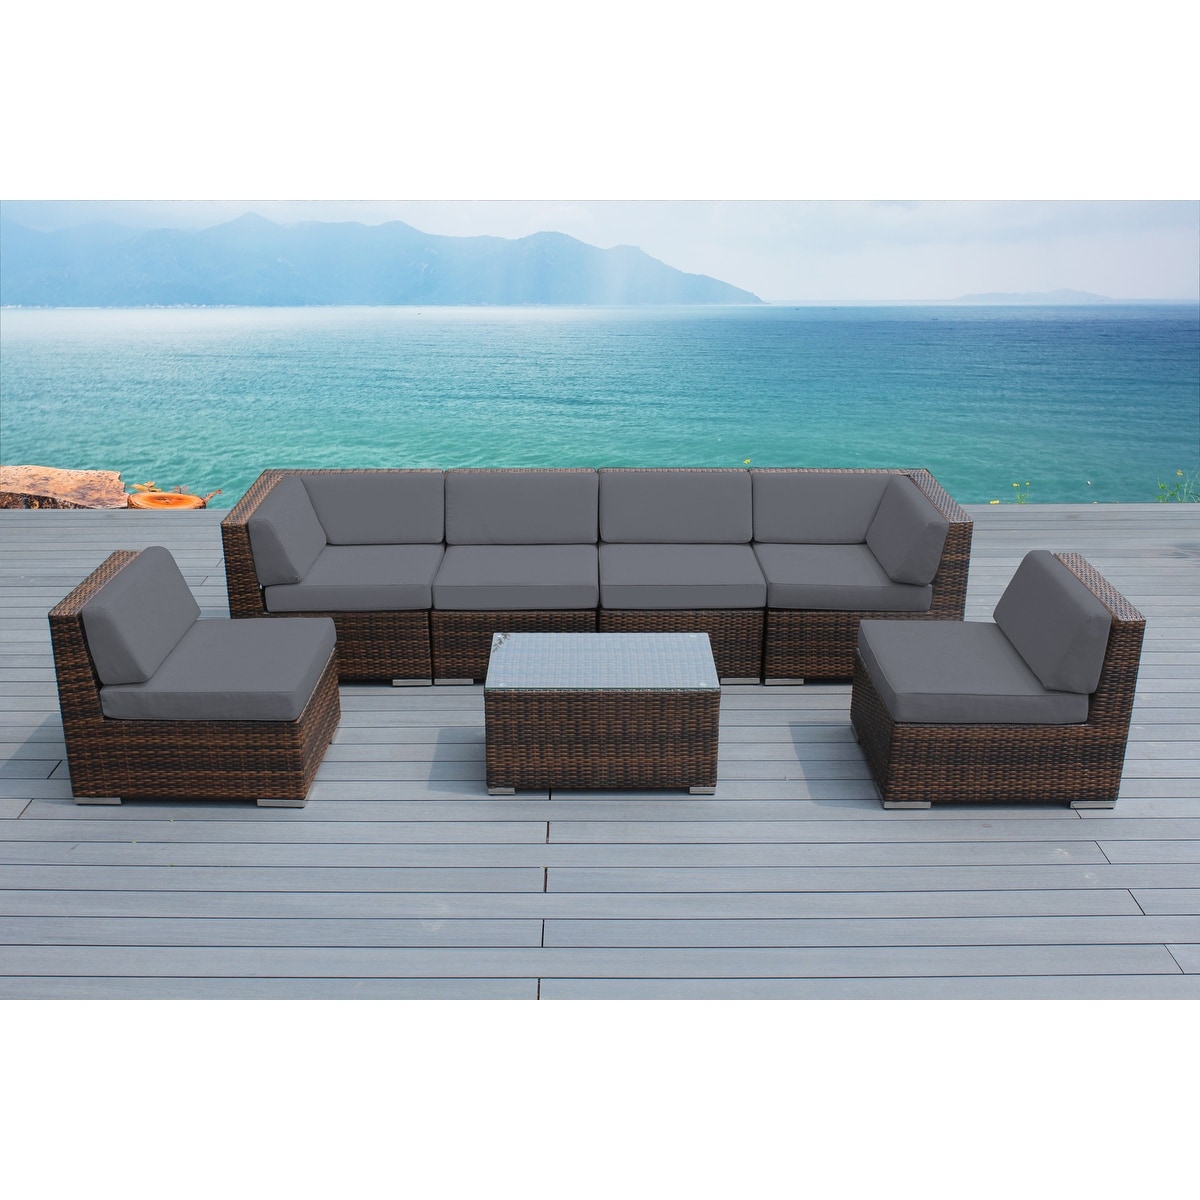 Ohana Outdoor Patio 7 Piece Mixed Brown Wicker Sectional With Cushions - No Assembly